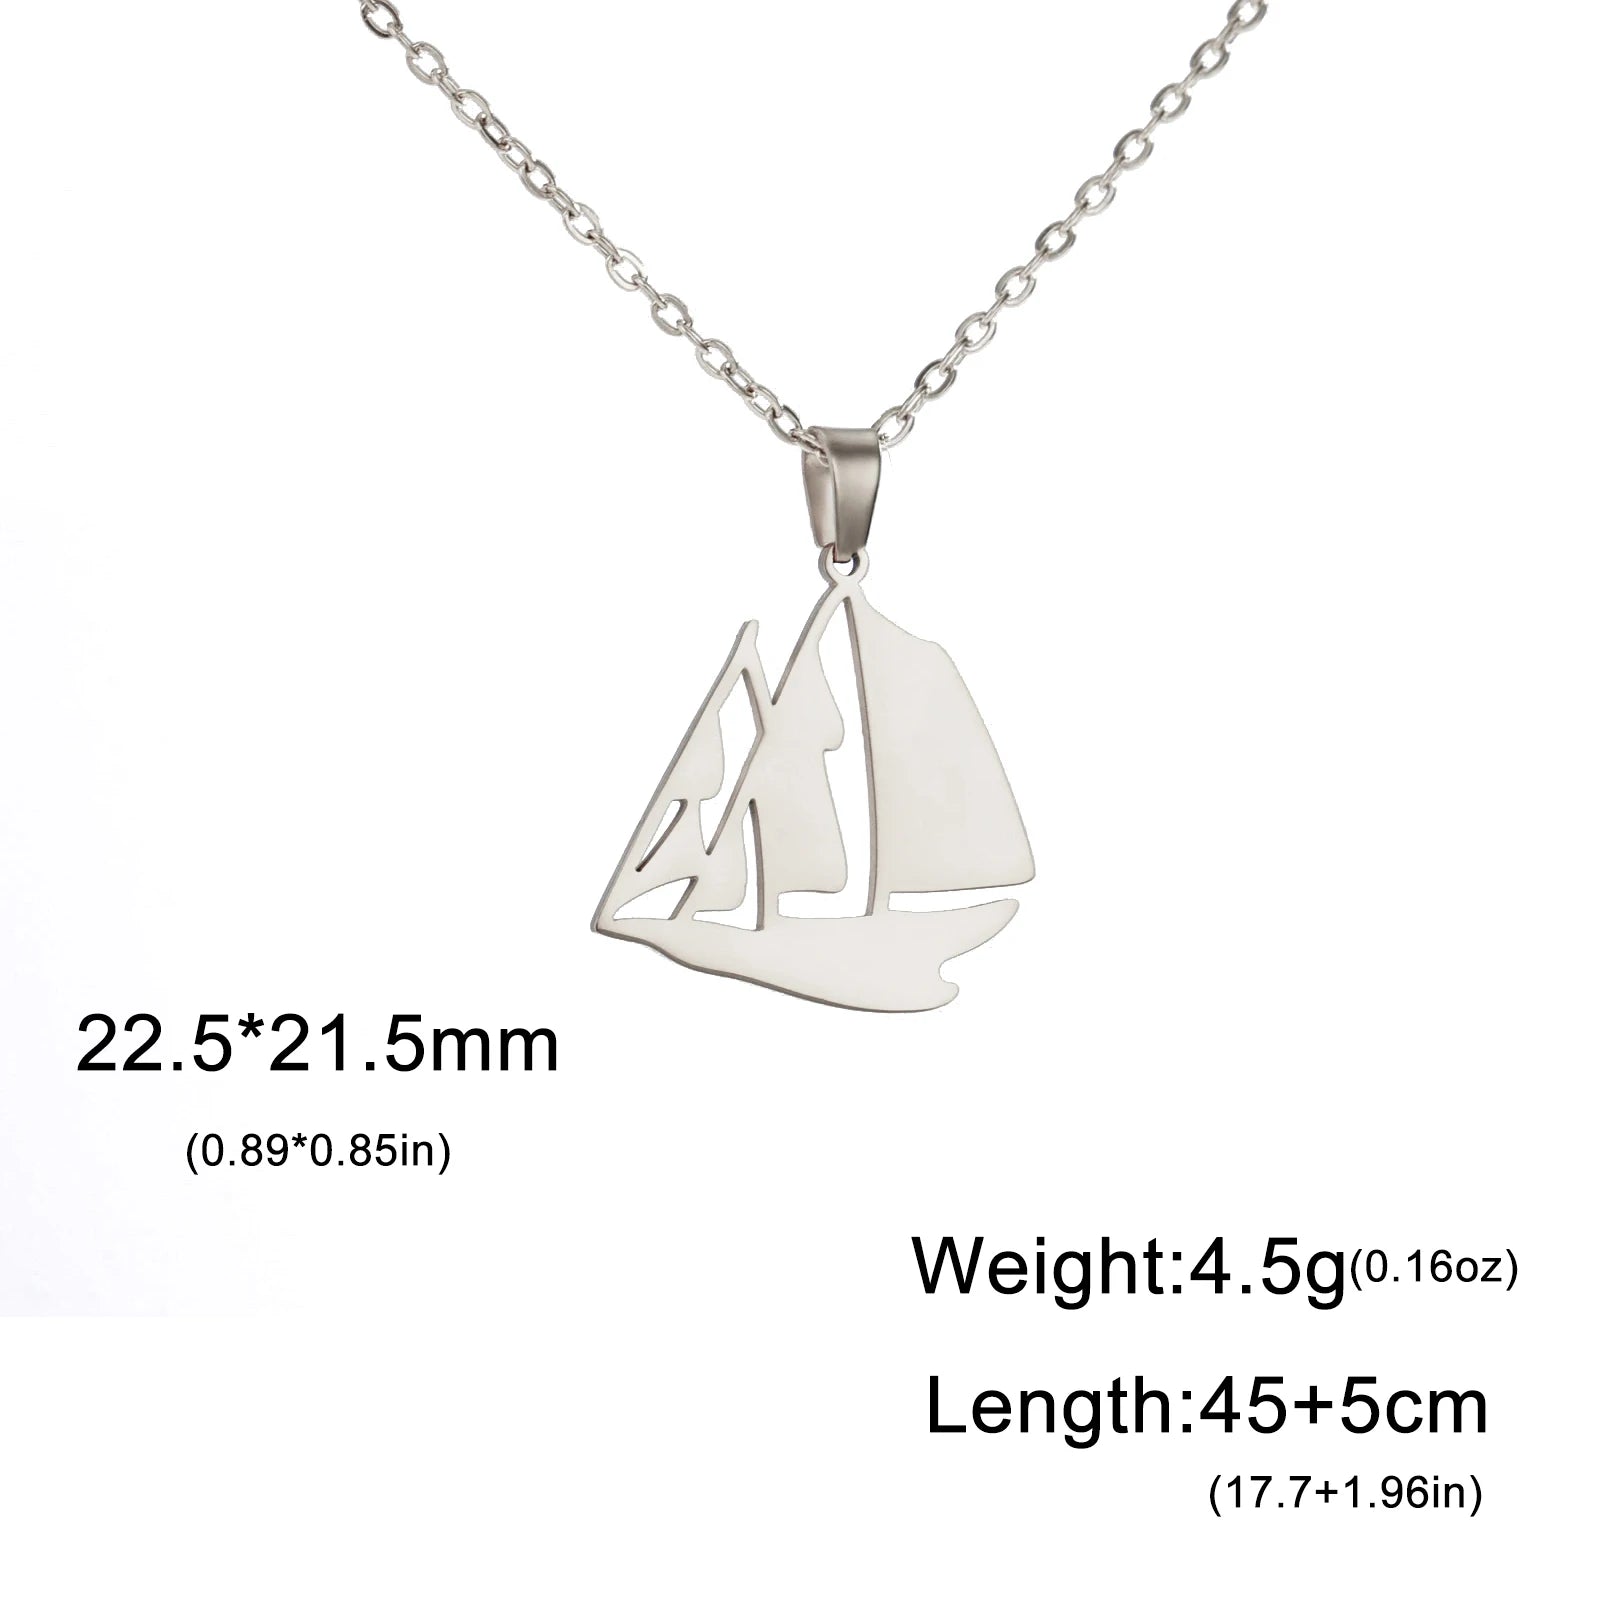 Sailboat Stainless Steel Ocean Necklace - Madeinsea©